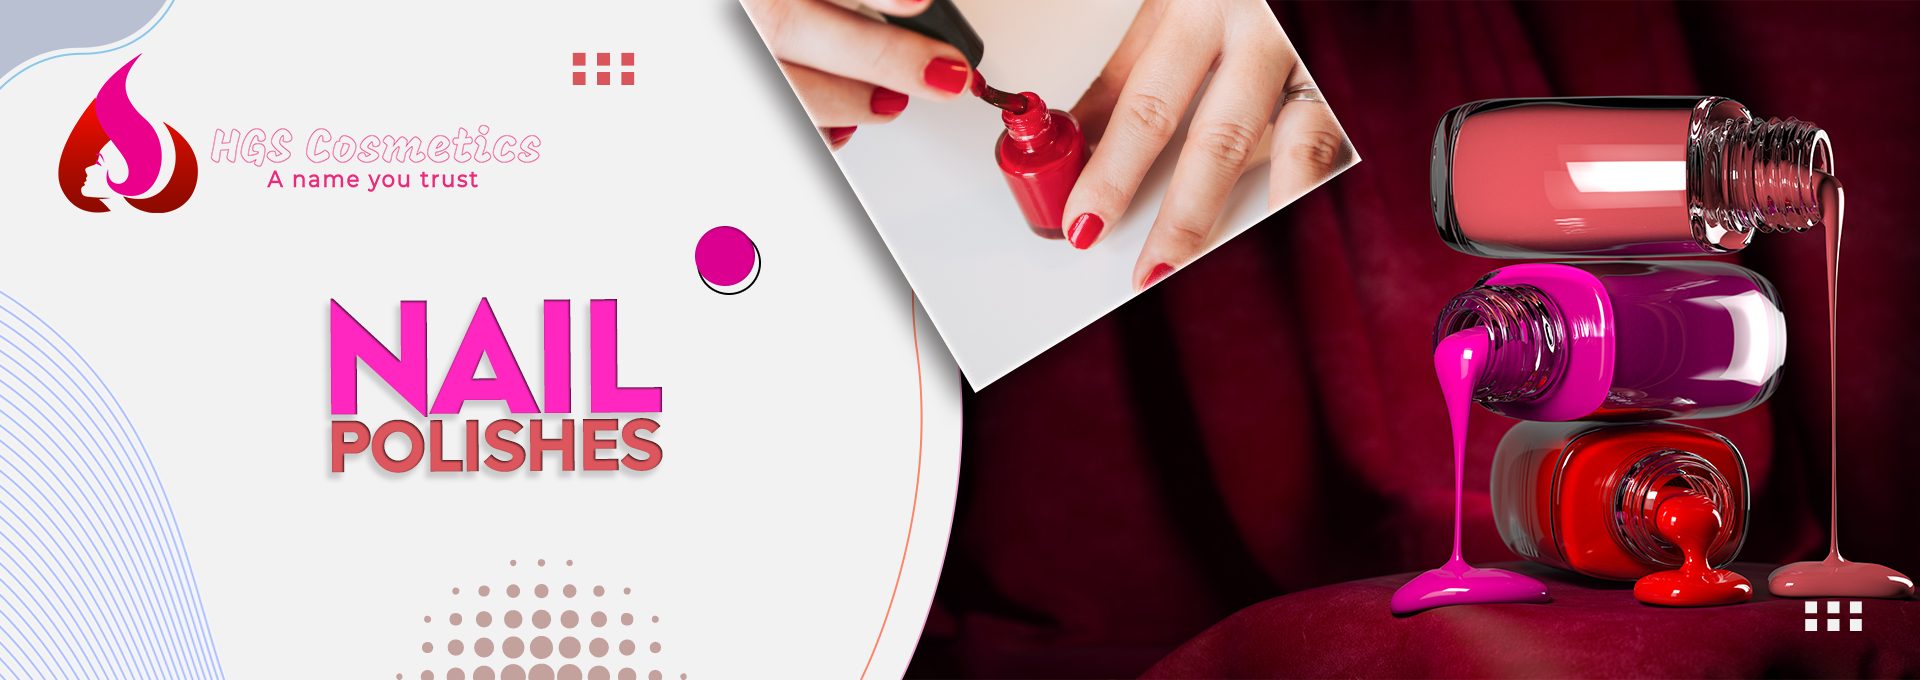 Shop Best Nail Polishes products Online @ HGS Cosmetics